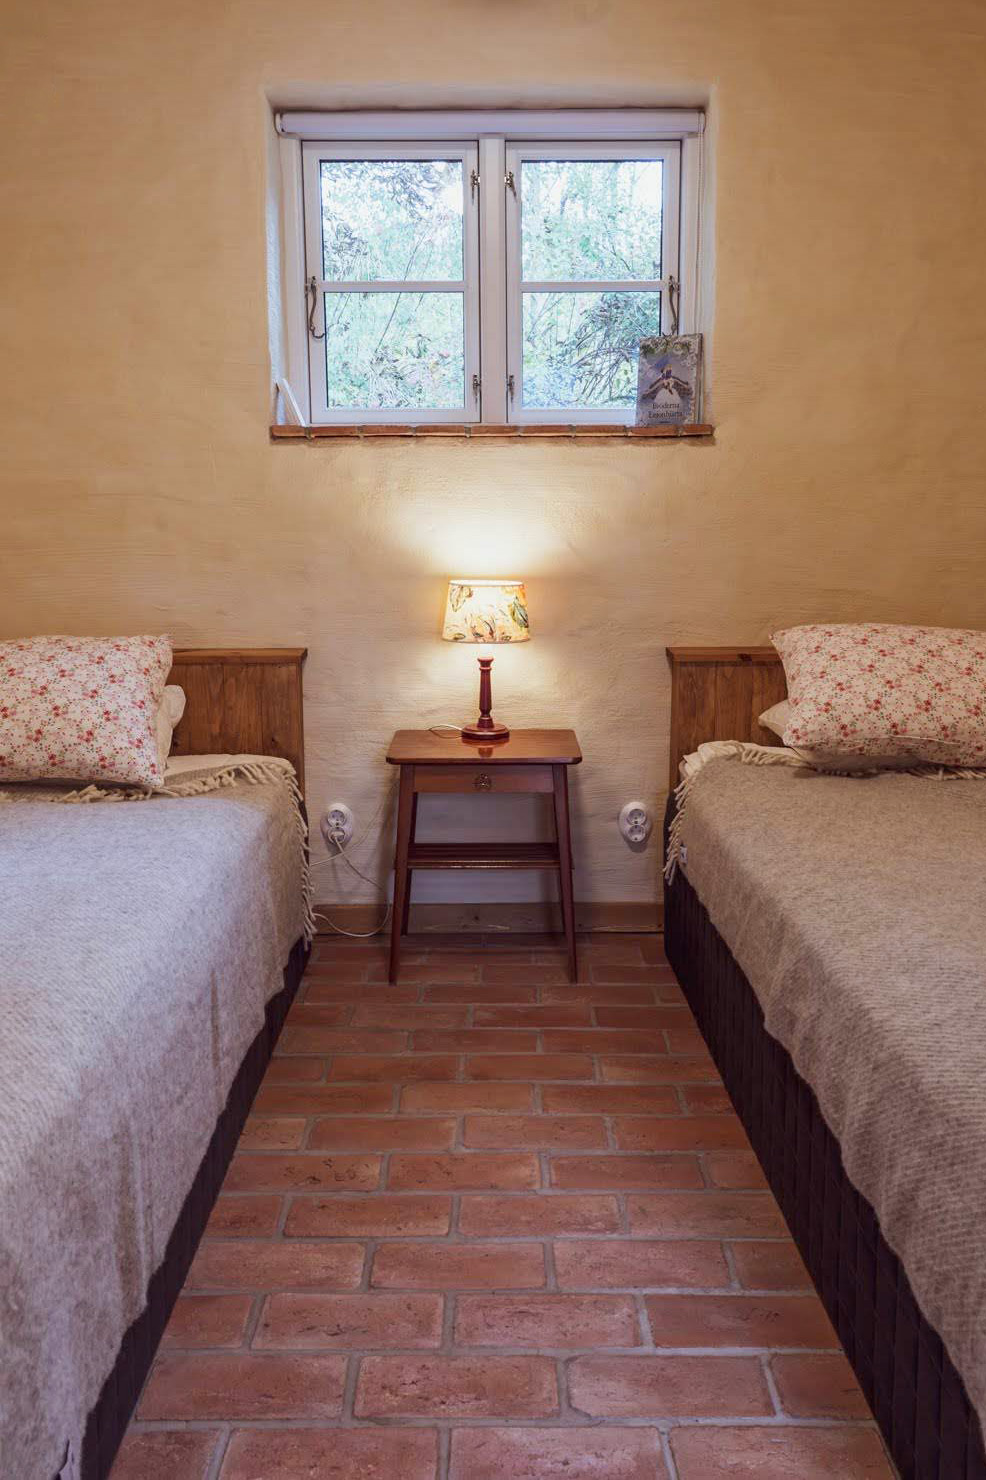 The small bedroom with two single beds.